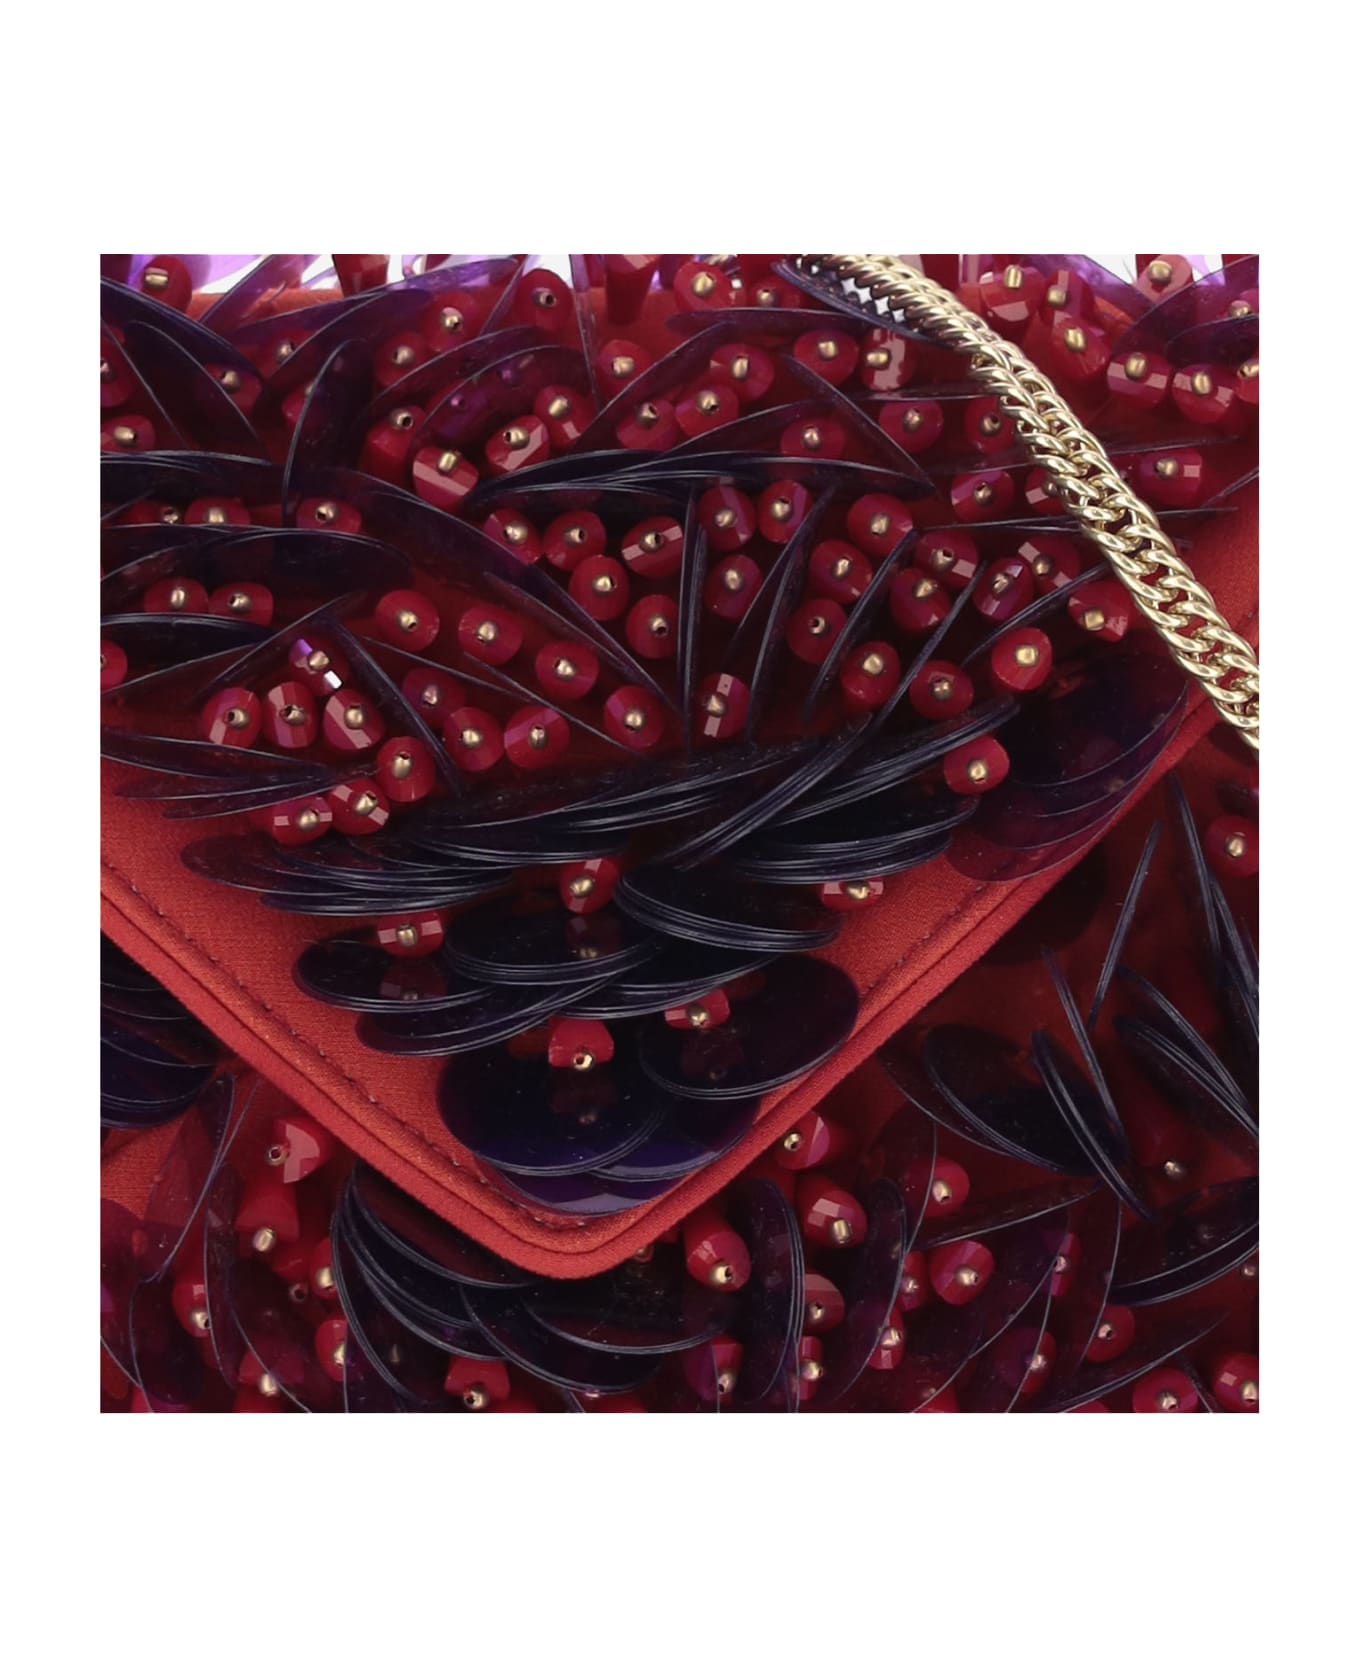 Dries Van Noten Silk Bag With Sequins And Beads - Red